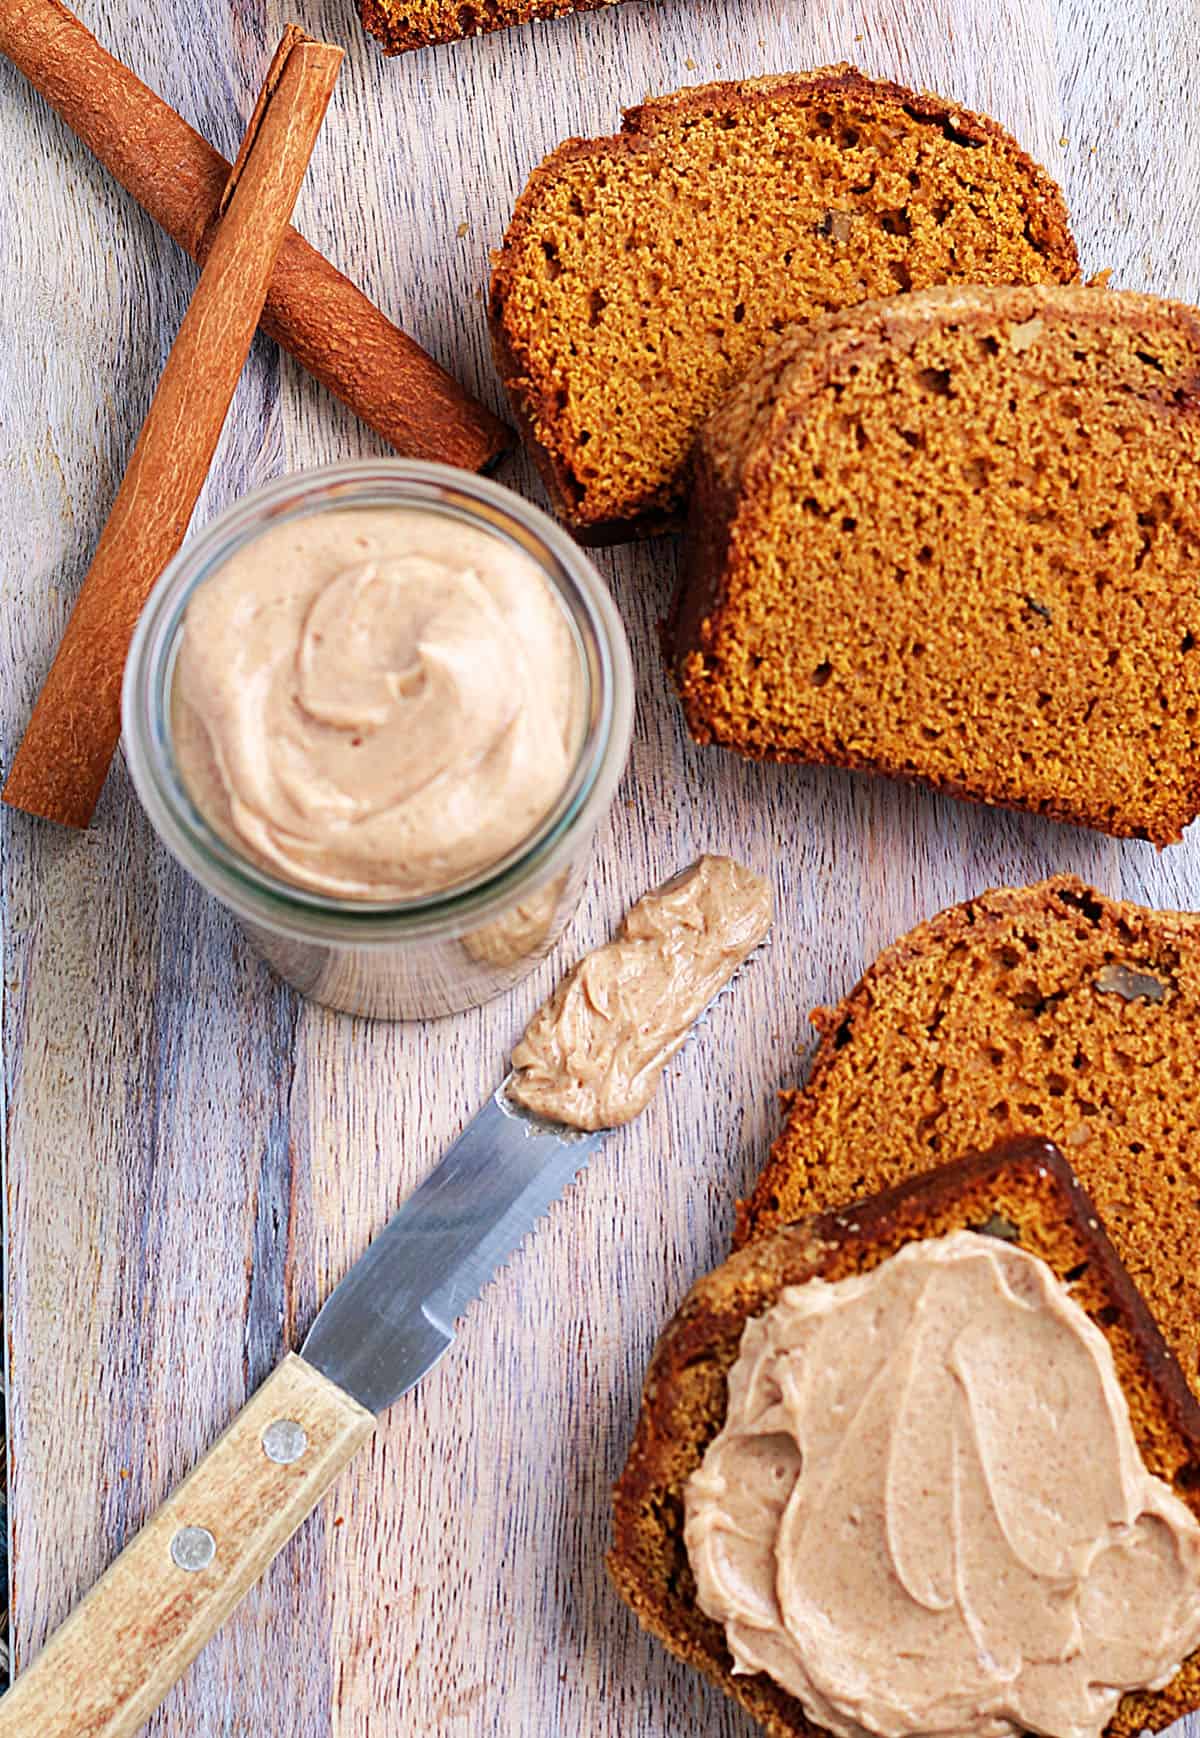 Cinnamon sticks are placed next to a sliced loaf of bread and a jar of Texas Roadhouse butter.